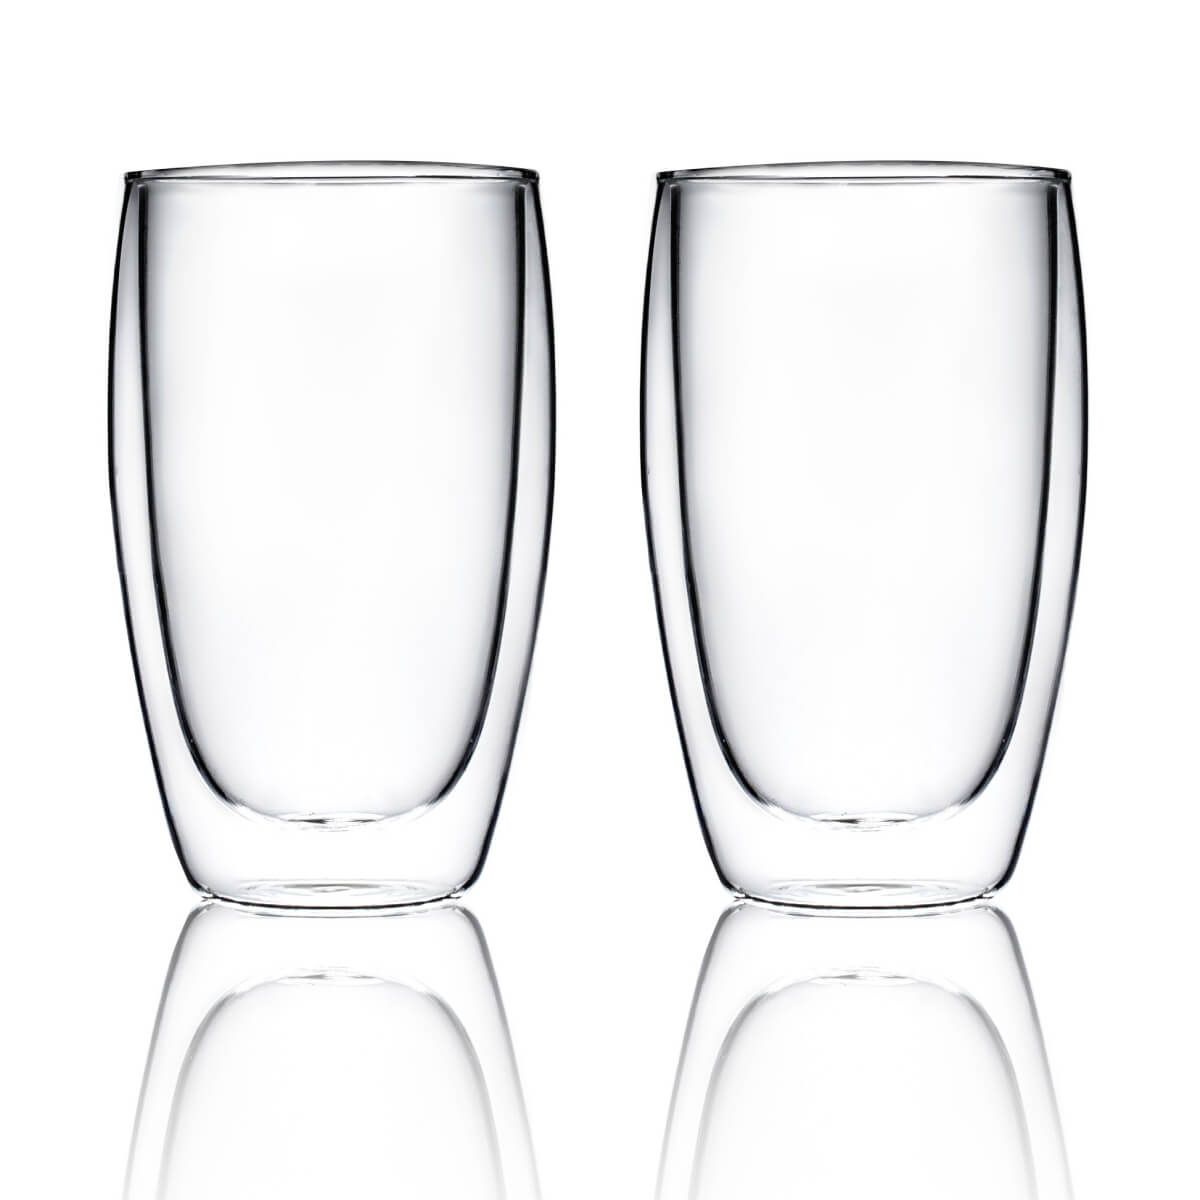 5 oz Double Walled Glass with Handle - Kitchables